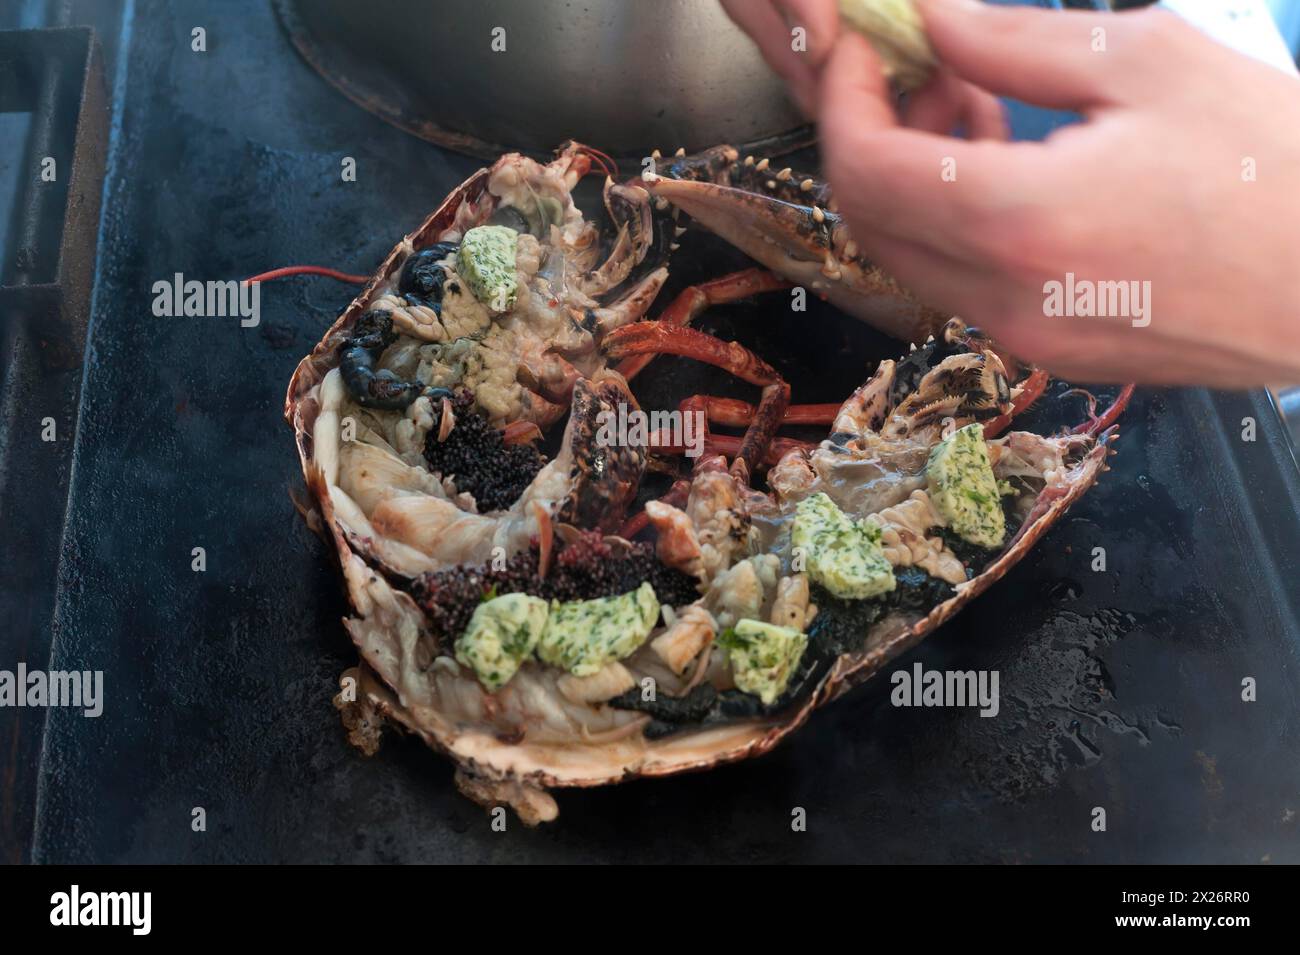 Cooked lobster (homarus) with caviar, vegetables and garlic butter on a plancha, Atlantic coast, Vandee, France Stock Photo